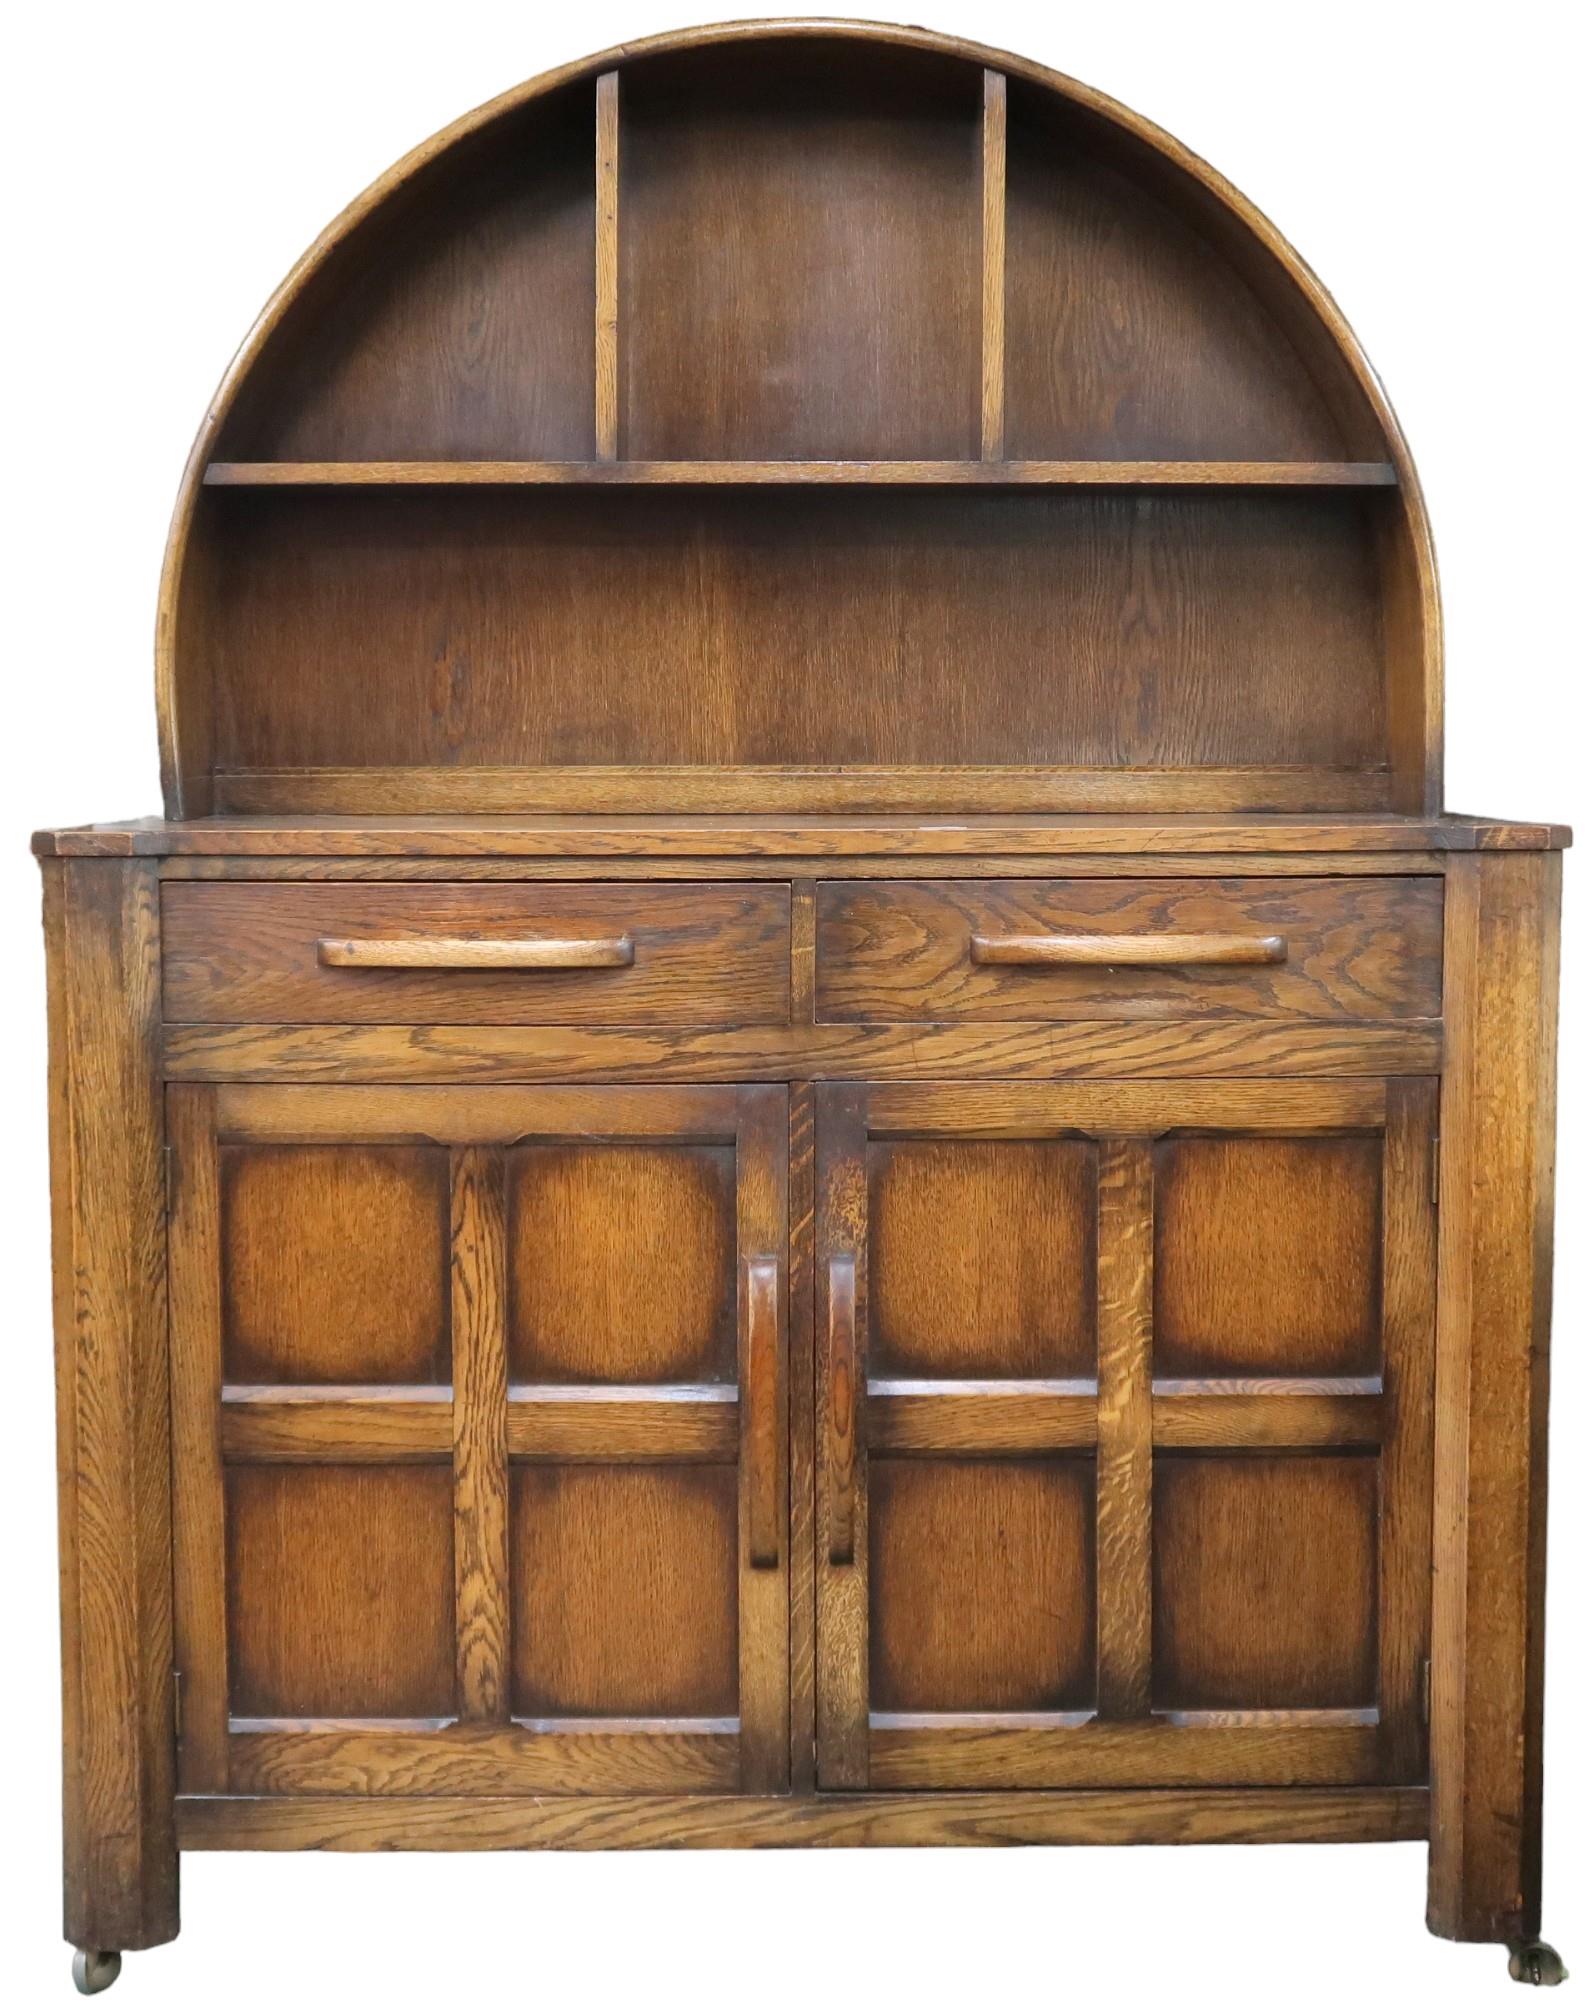 A 20th century oak sideboard with arched shelved back on base with pair of drawers over pair of